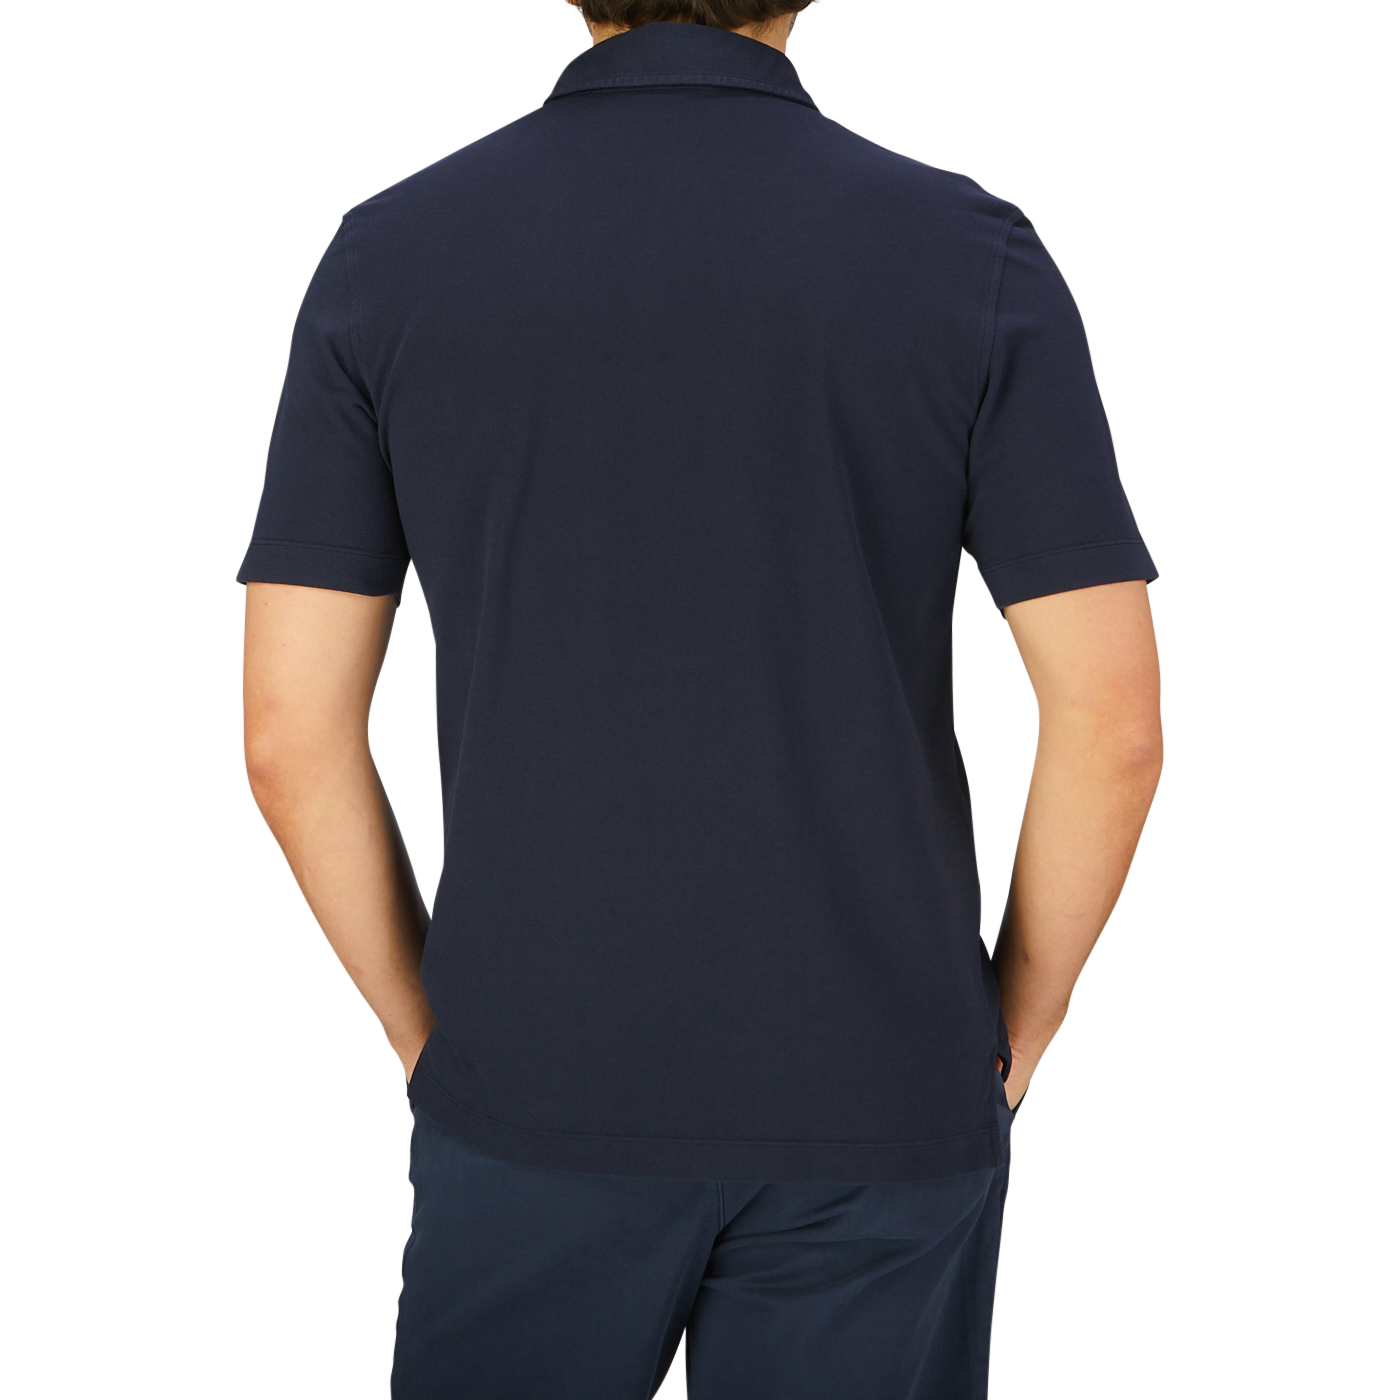 A man seen from behind wearing a dark blue Drumohr Navy Blue Cotton Piquet Polo Shirt and matching pants.